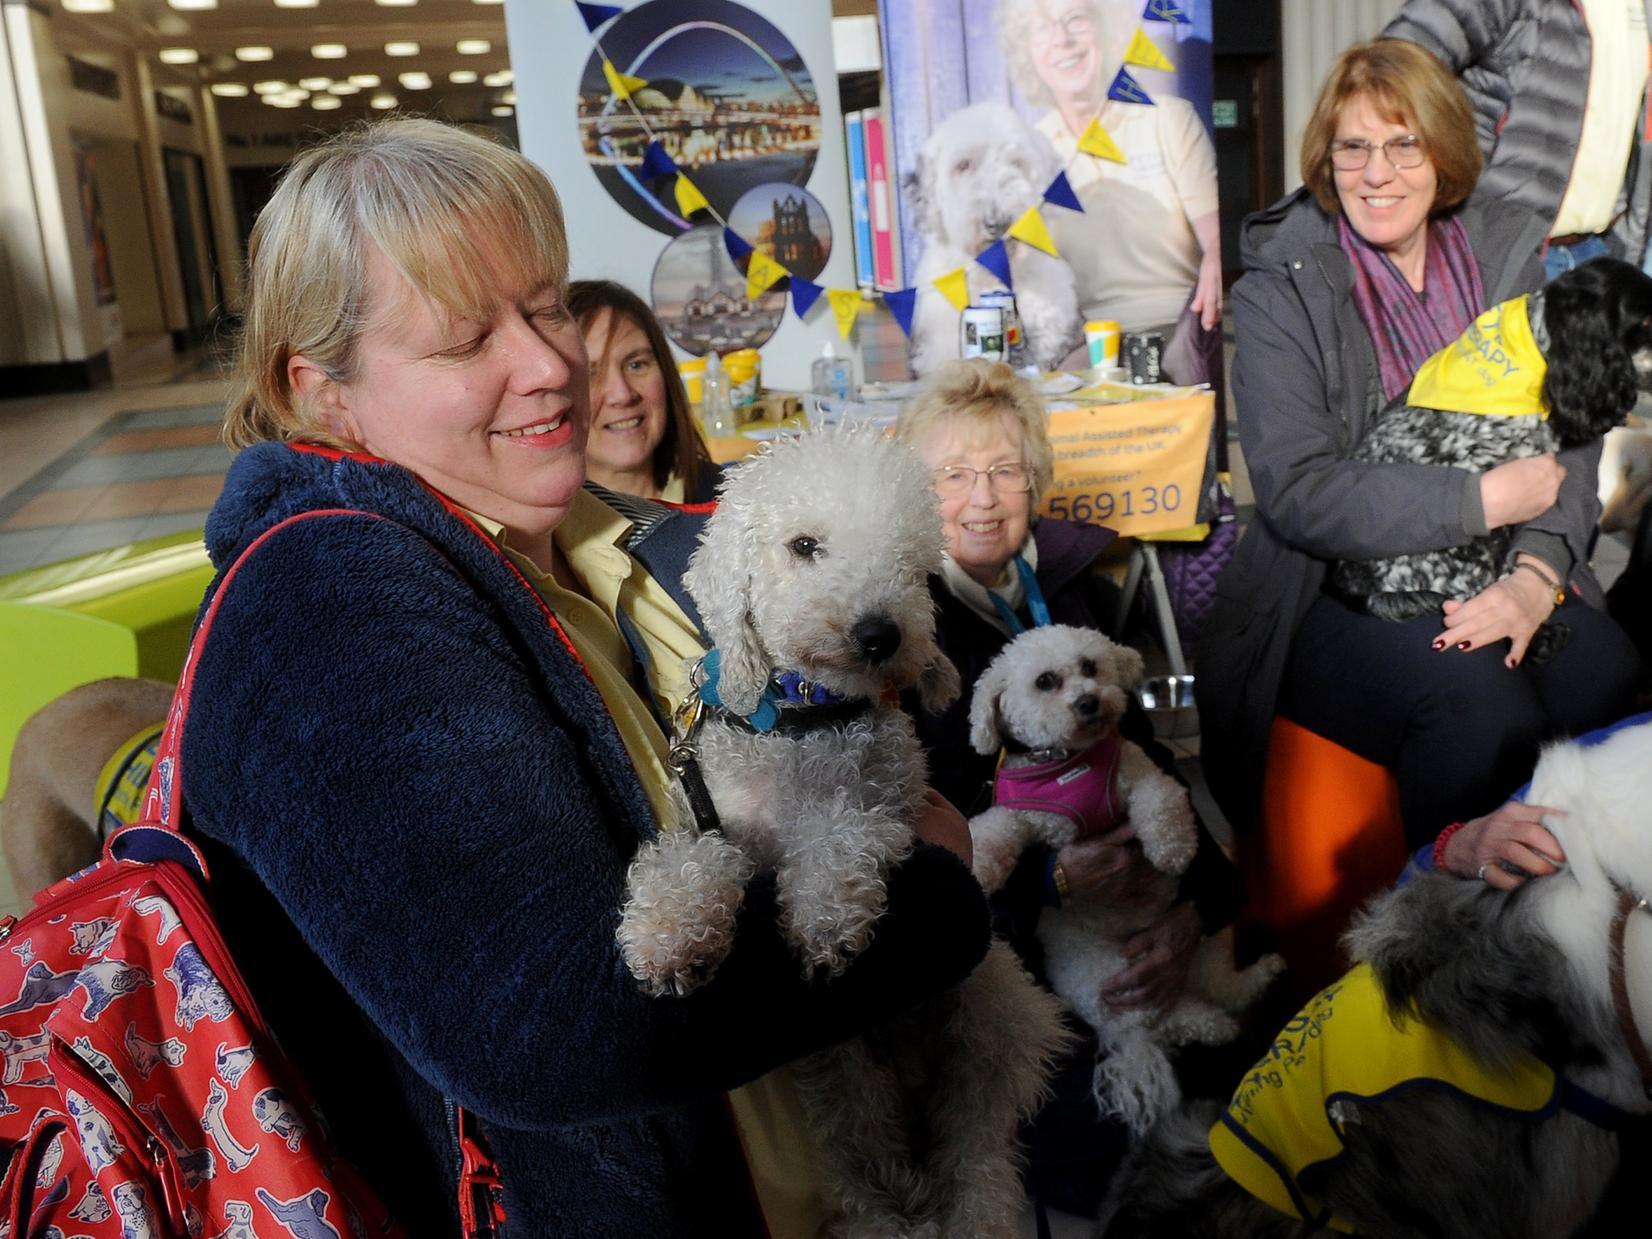 "We had around 10 patient pooches all open to strokes, cuddles and petting, and all on hand to give our customers a little lift as they face Blue Monday."